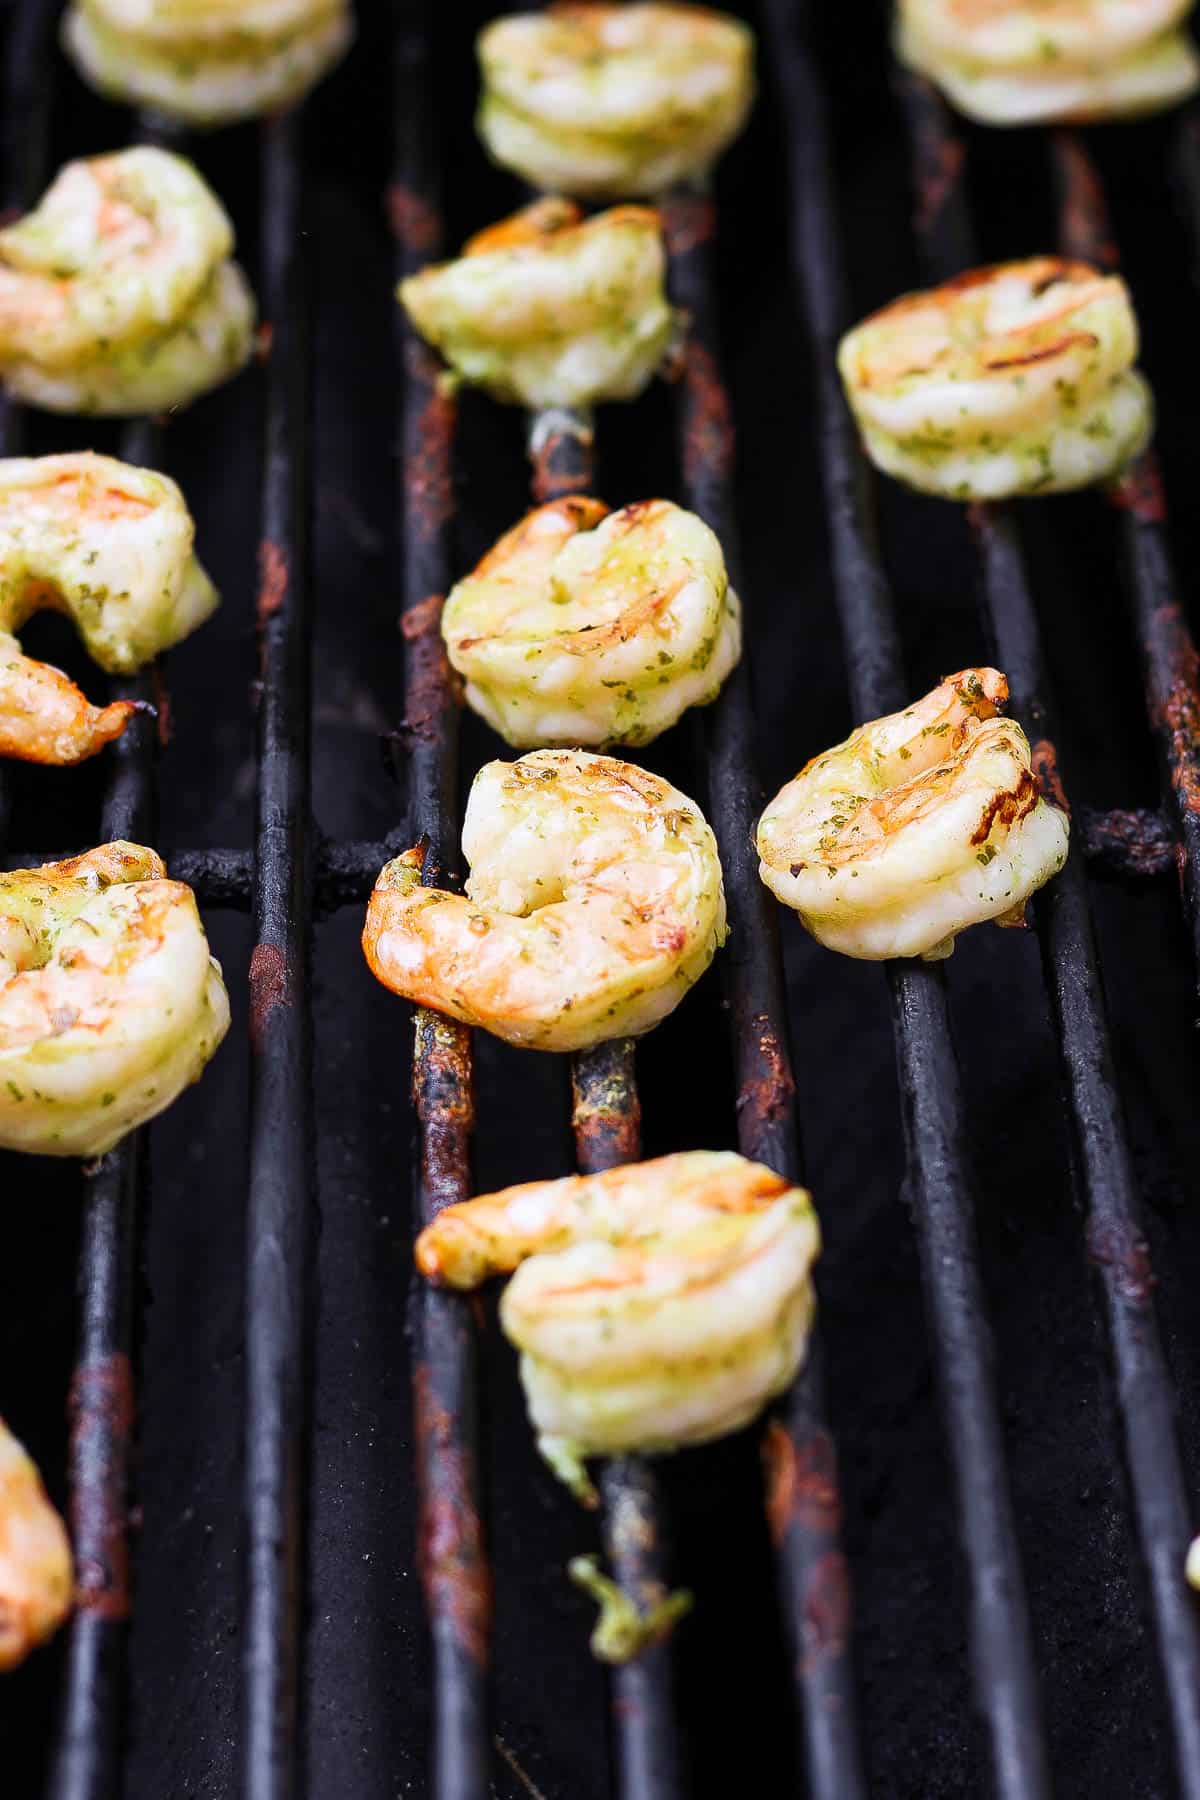 Marinated shrimp on a hot grill.